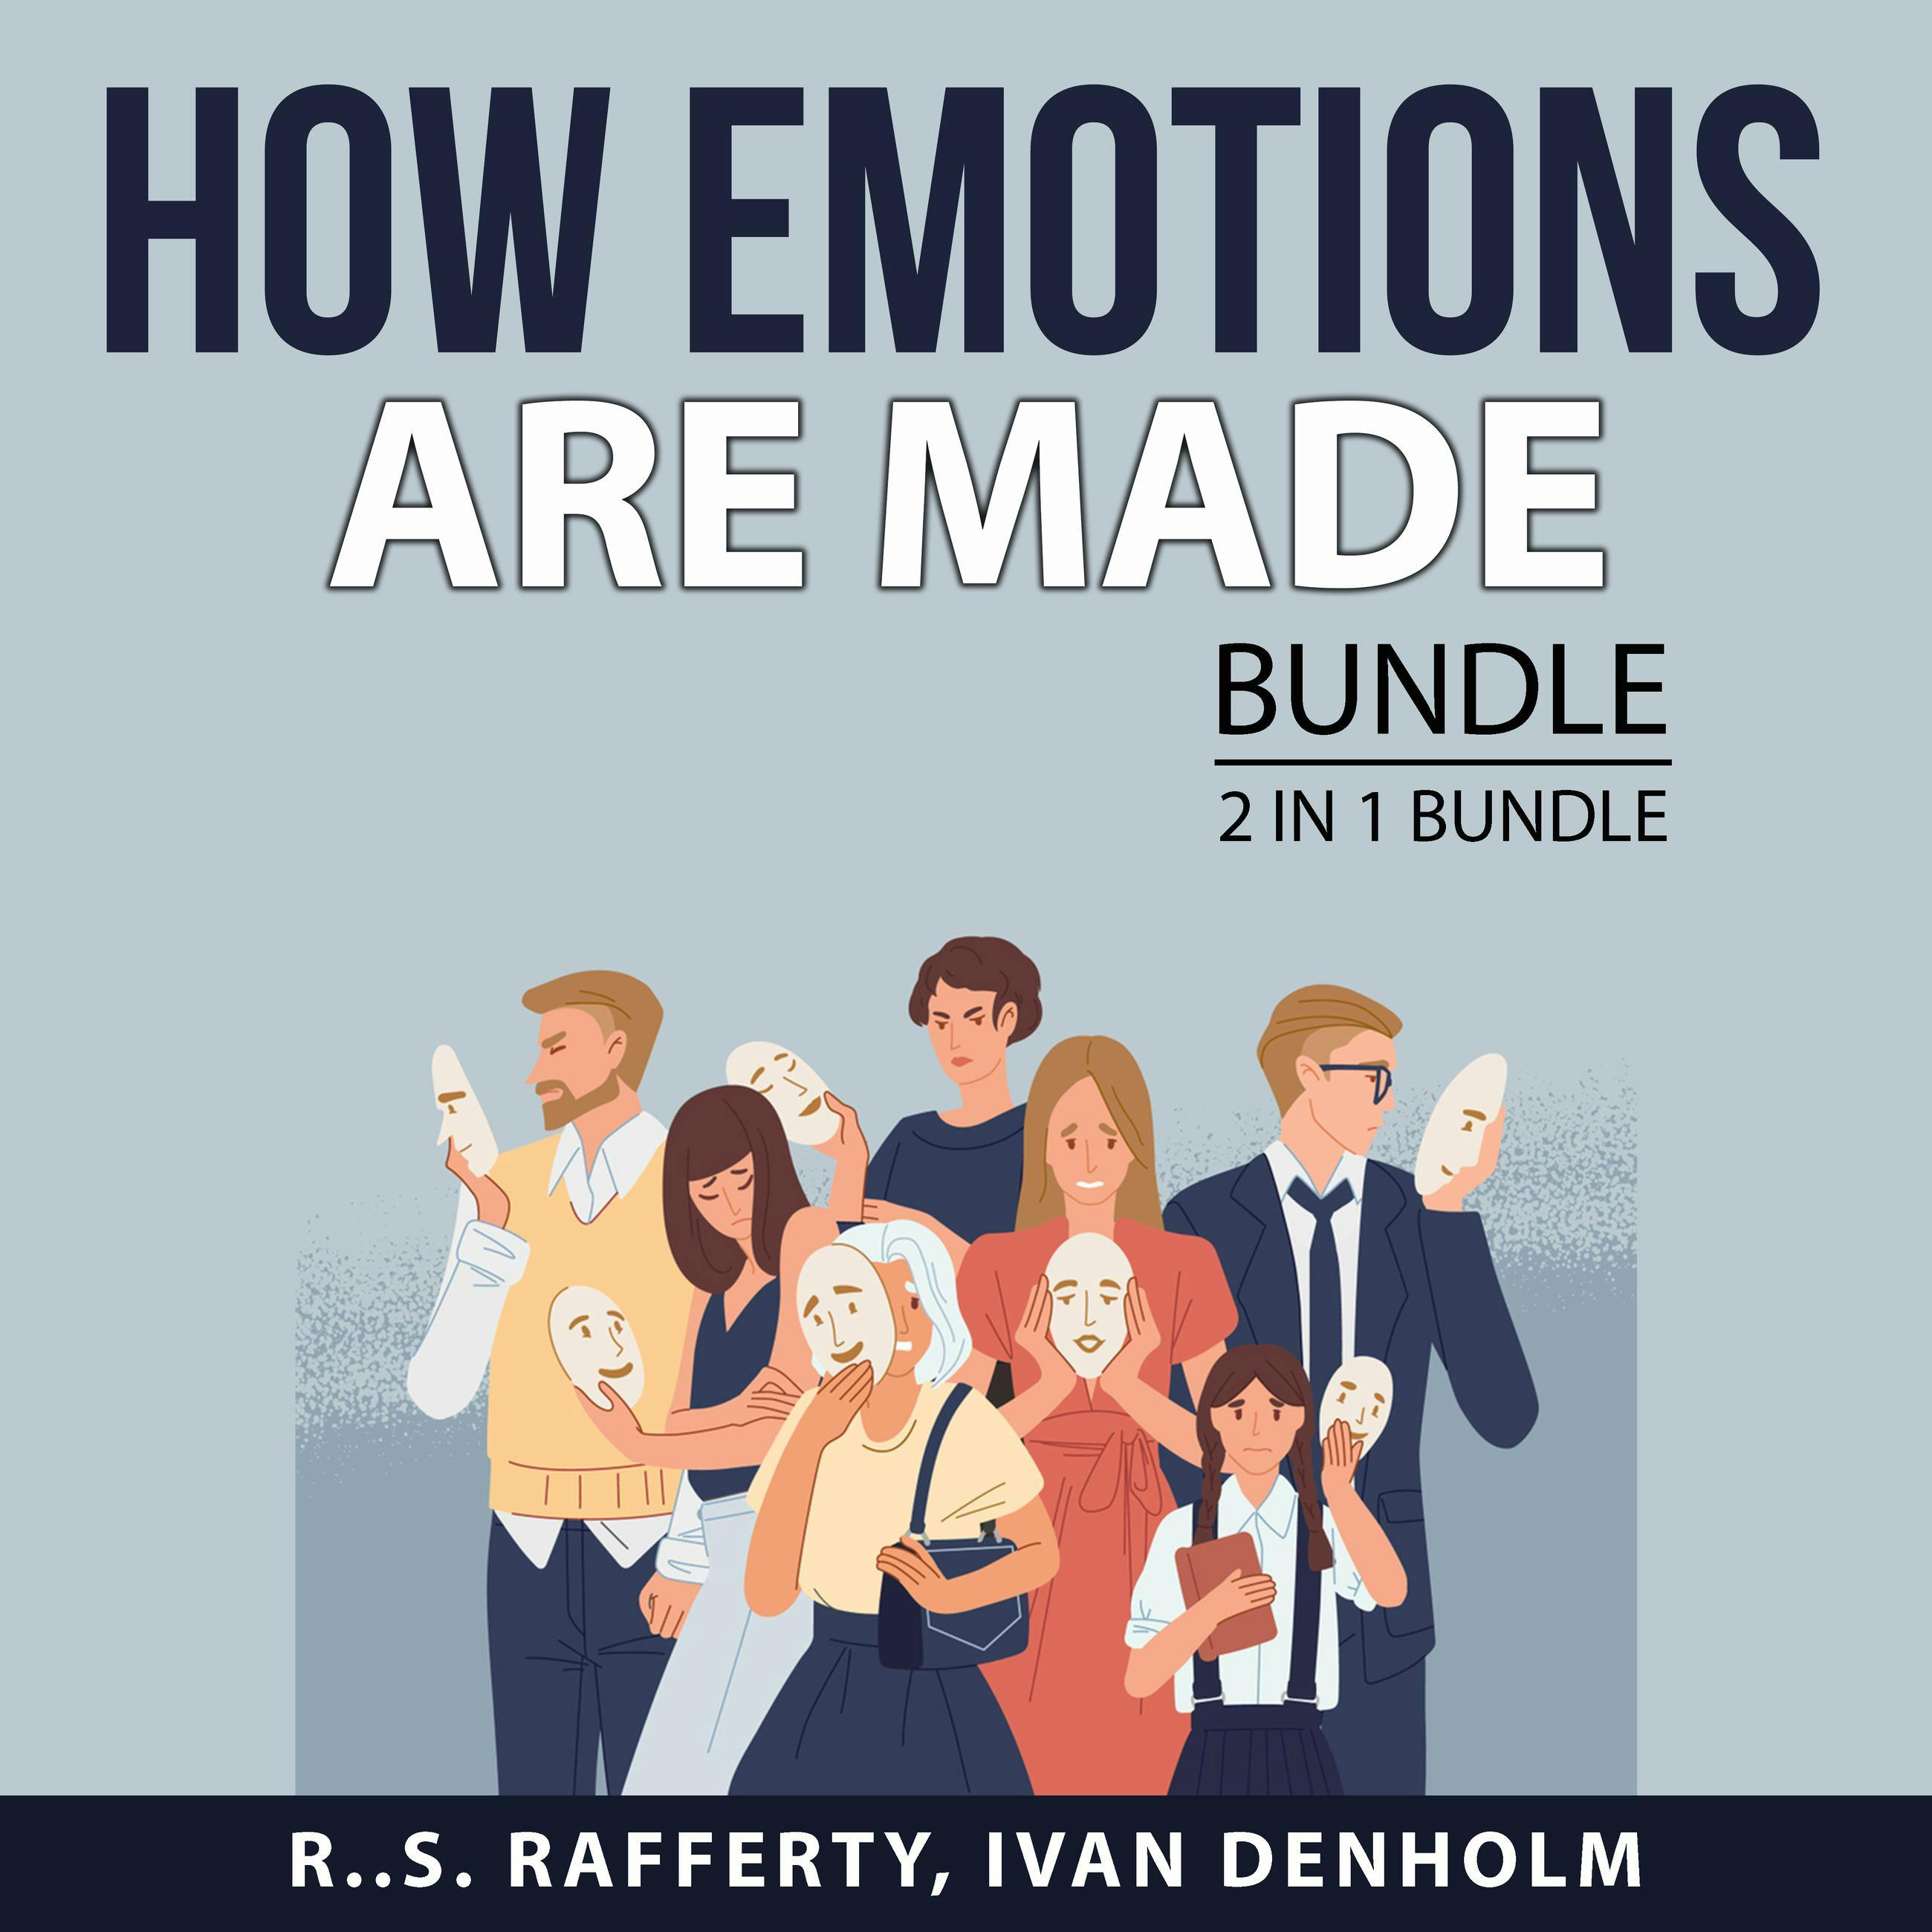 How Emotions Are Made Bundle, 2 in 1 Bundle: Your Feelings and Emotions and Master Your Feelings - undefined